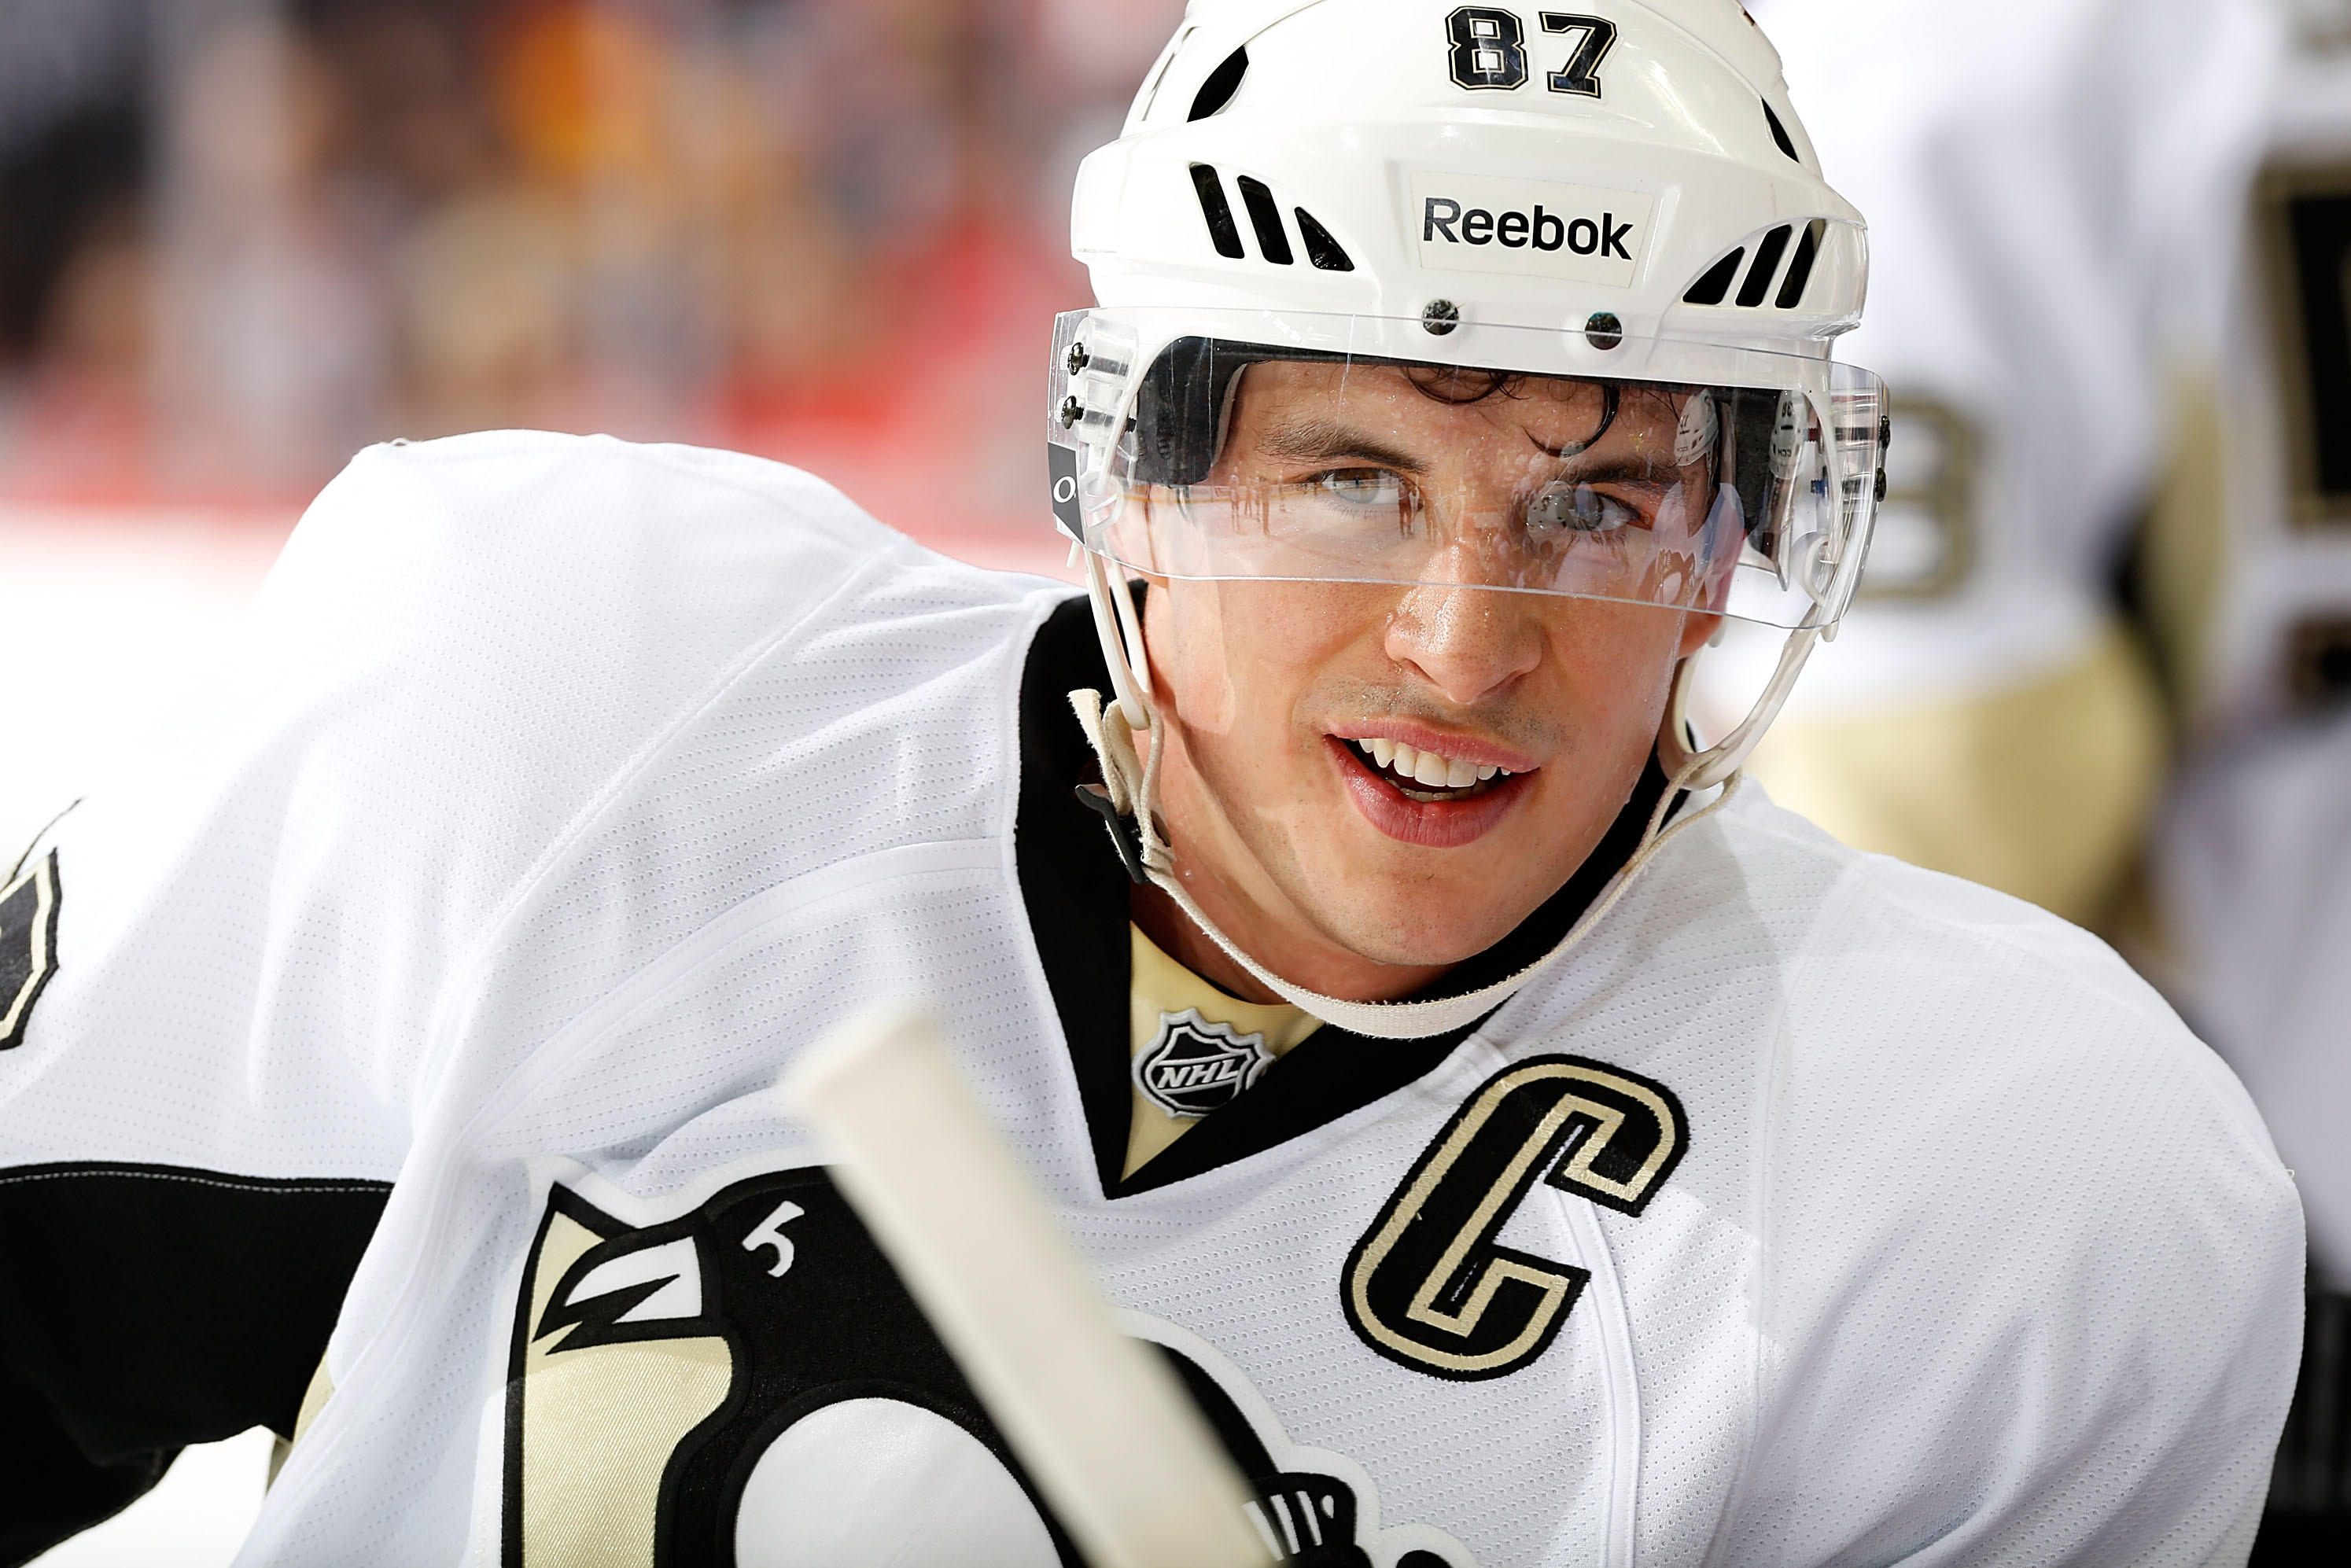 The Sidney Crosby Show: Pens v Rangers (W 8-3)